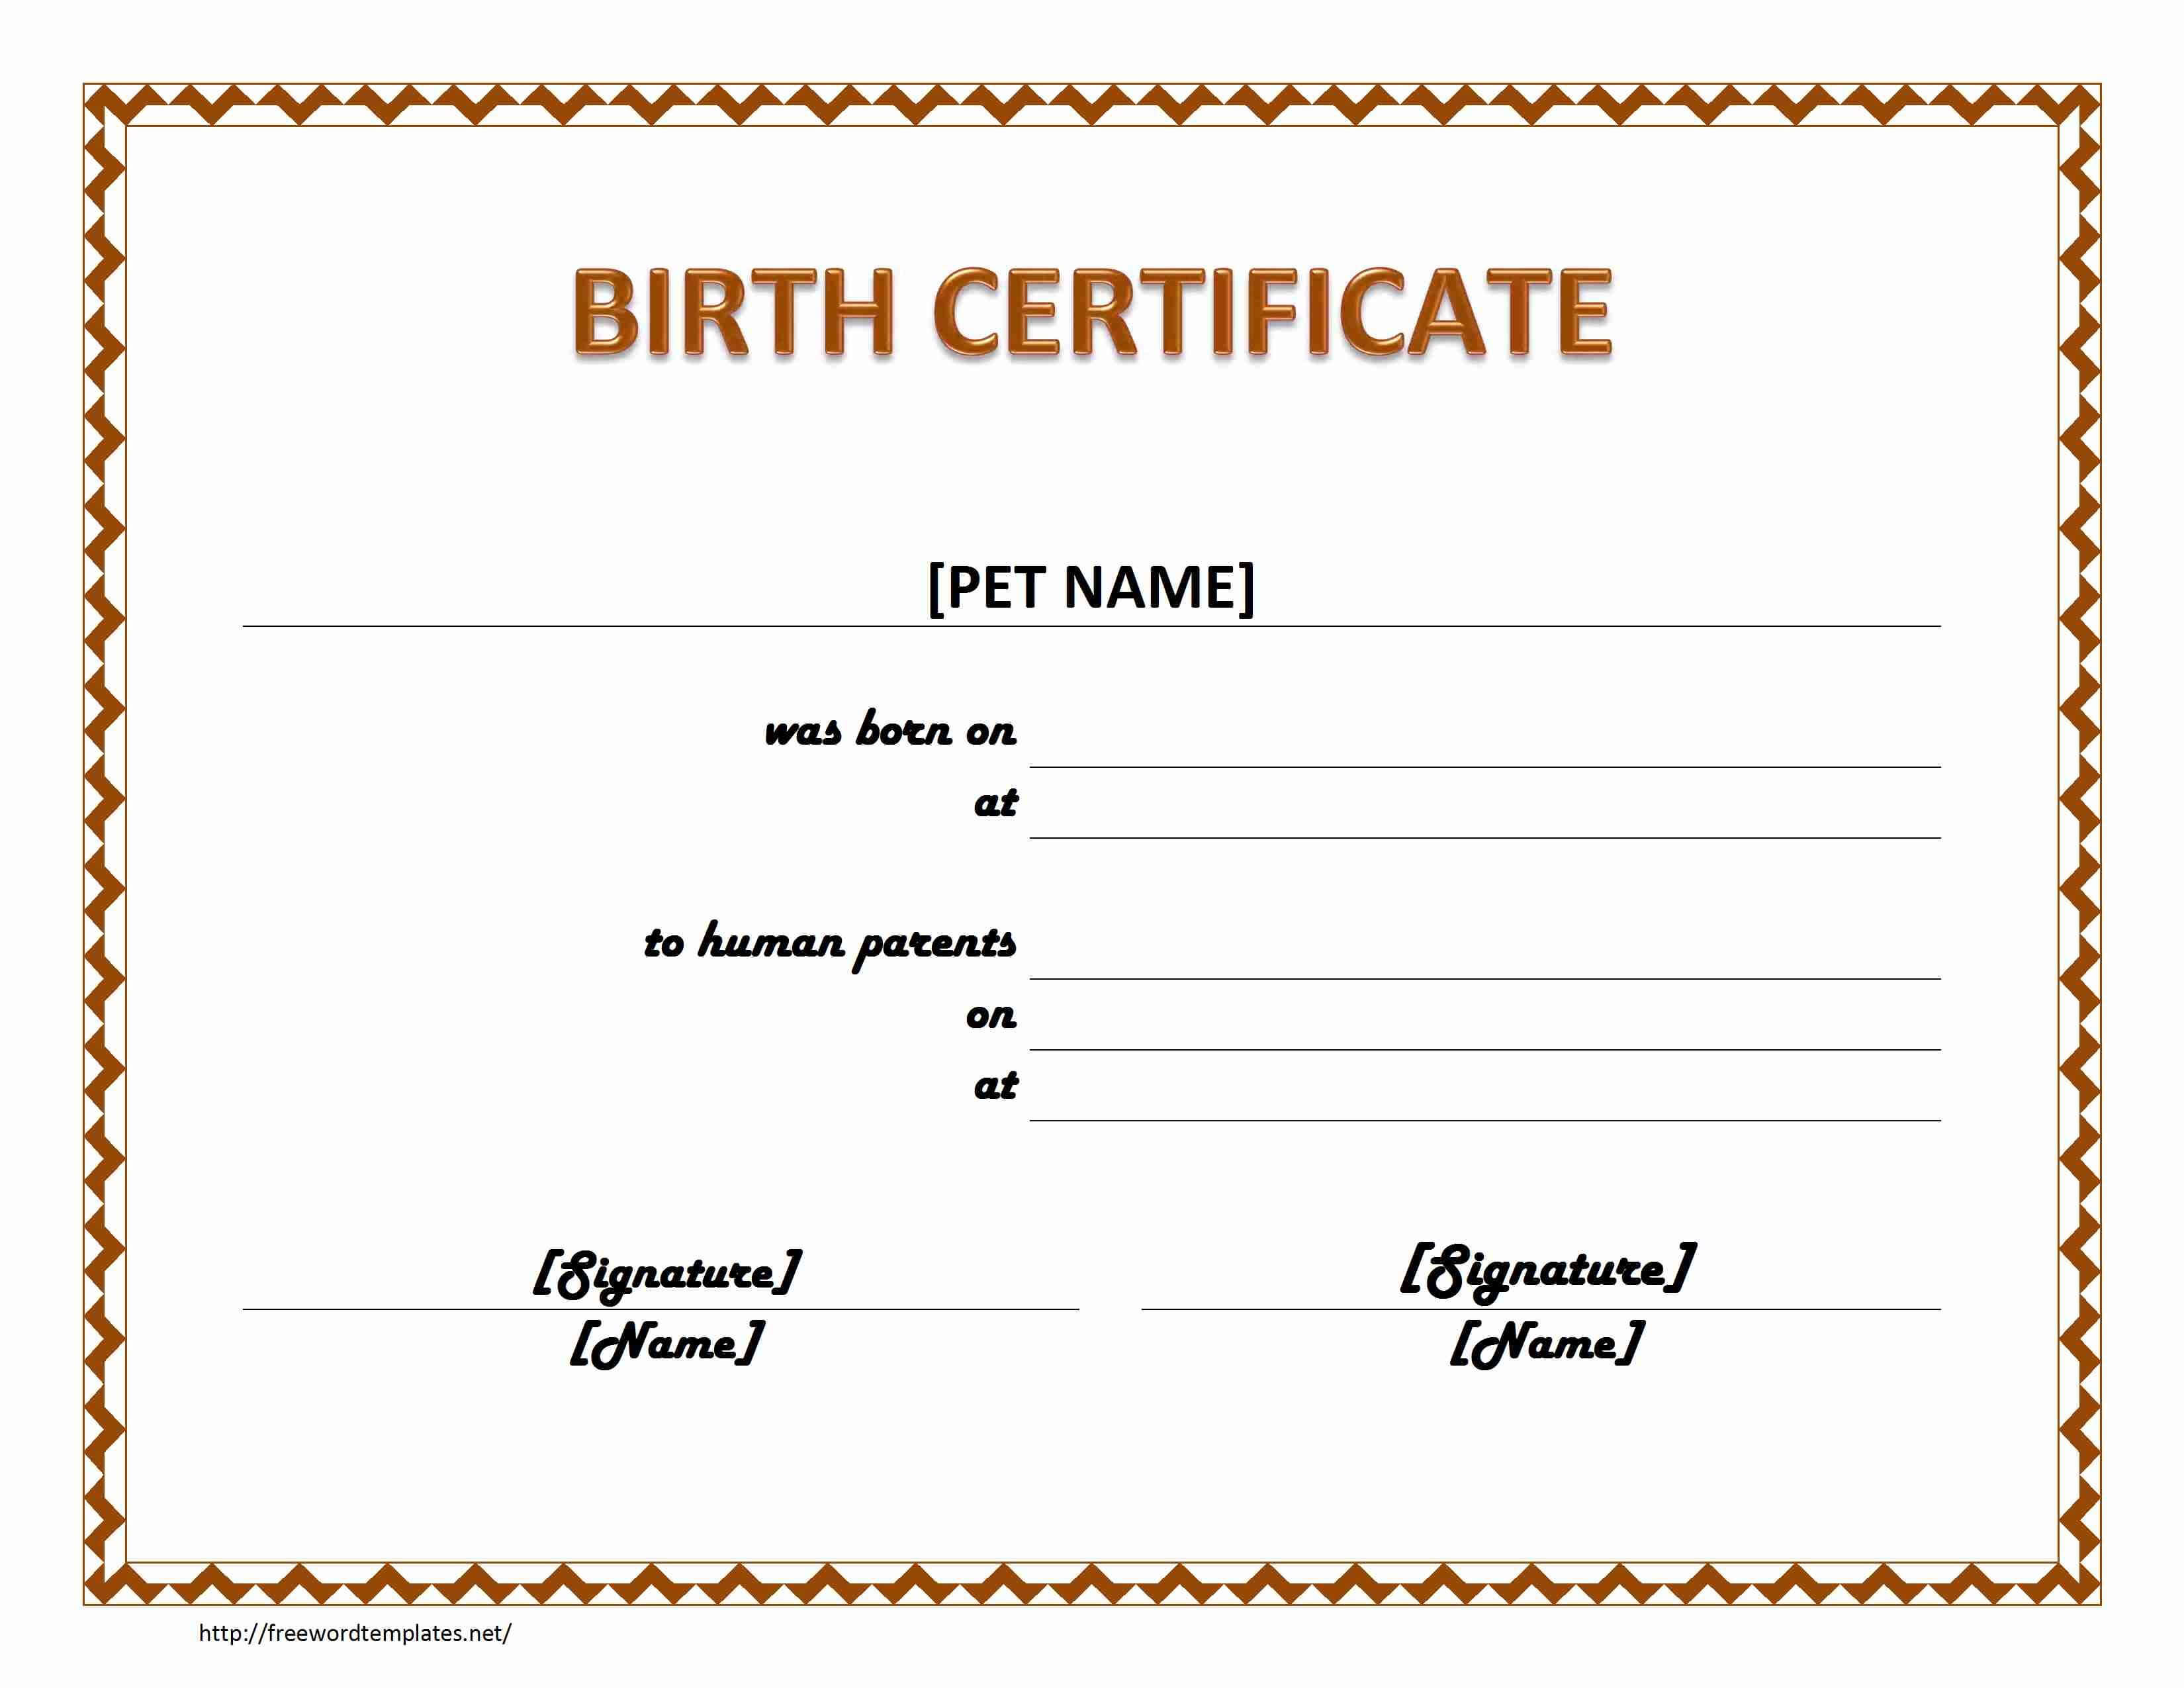 Pet Birth Certificate Maker | Pet Birth Certificate For Word Within Blank Adoption Certificate Template